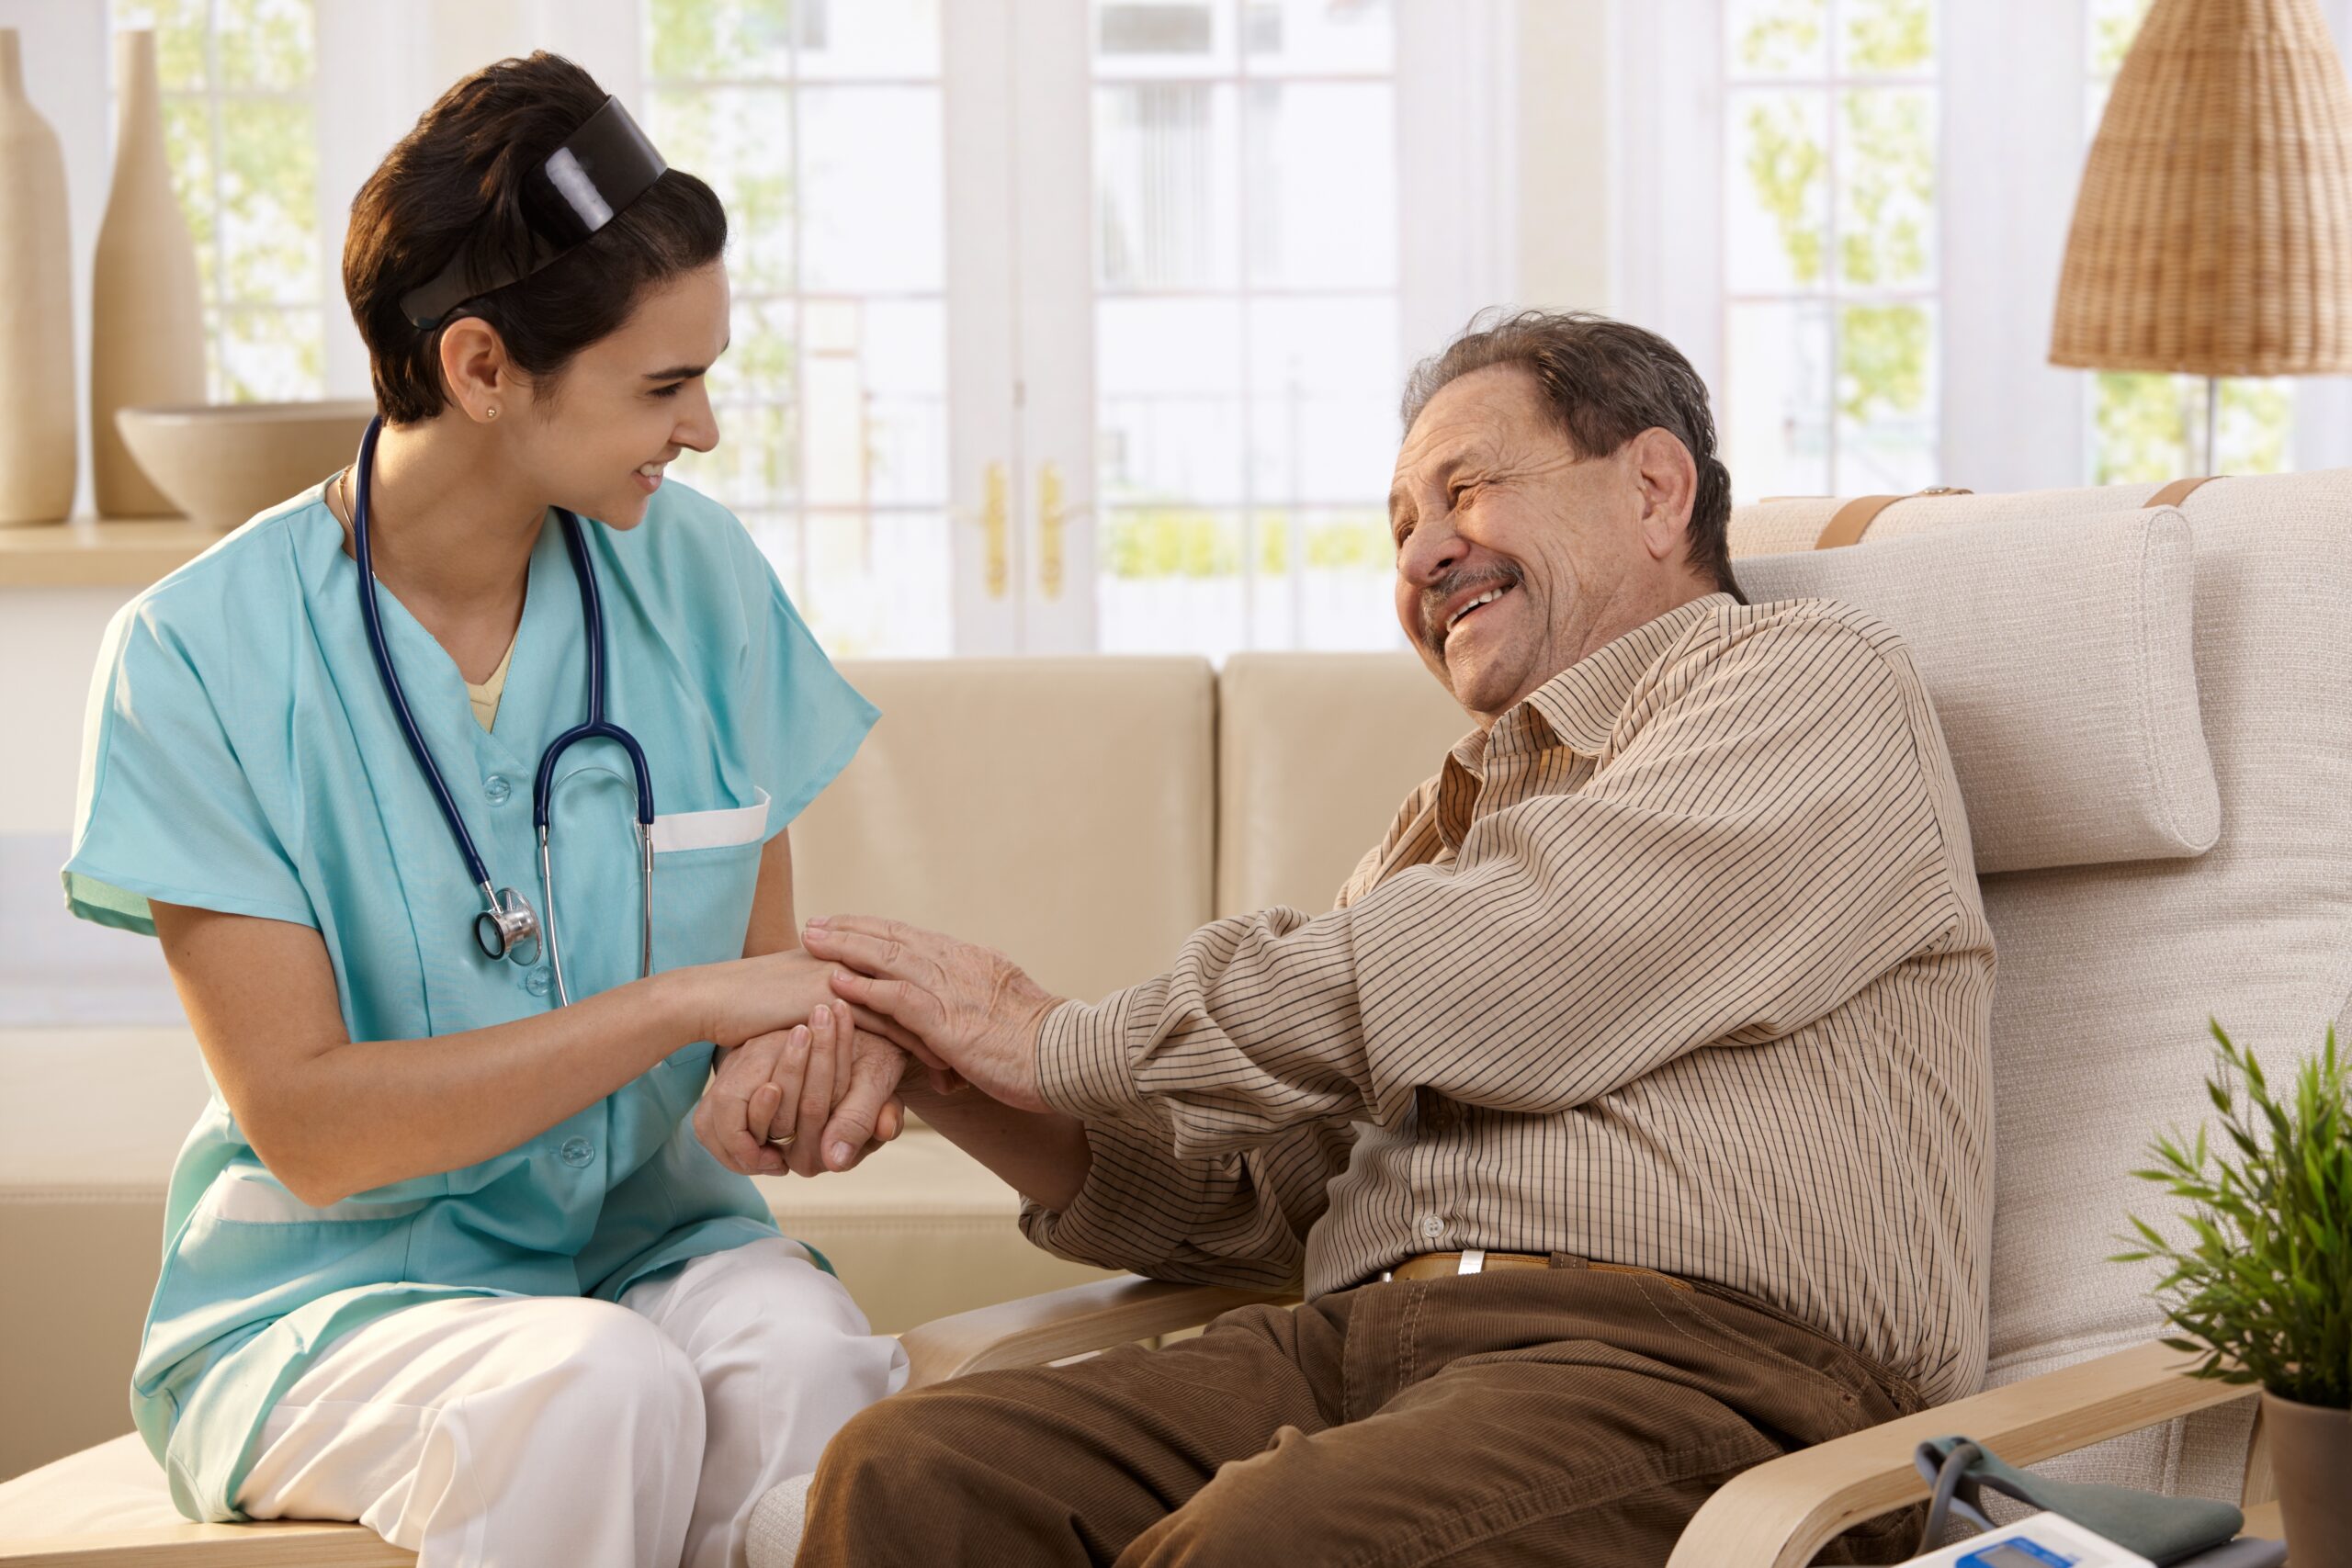 Happy nurse holding hands of elderly patient sitting side by side at home, laughing.